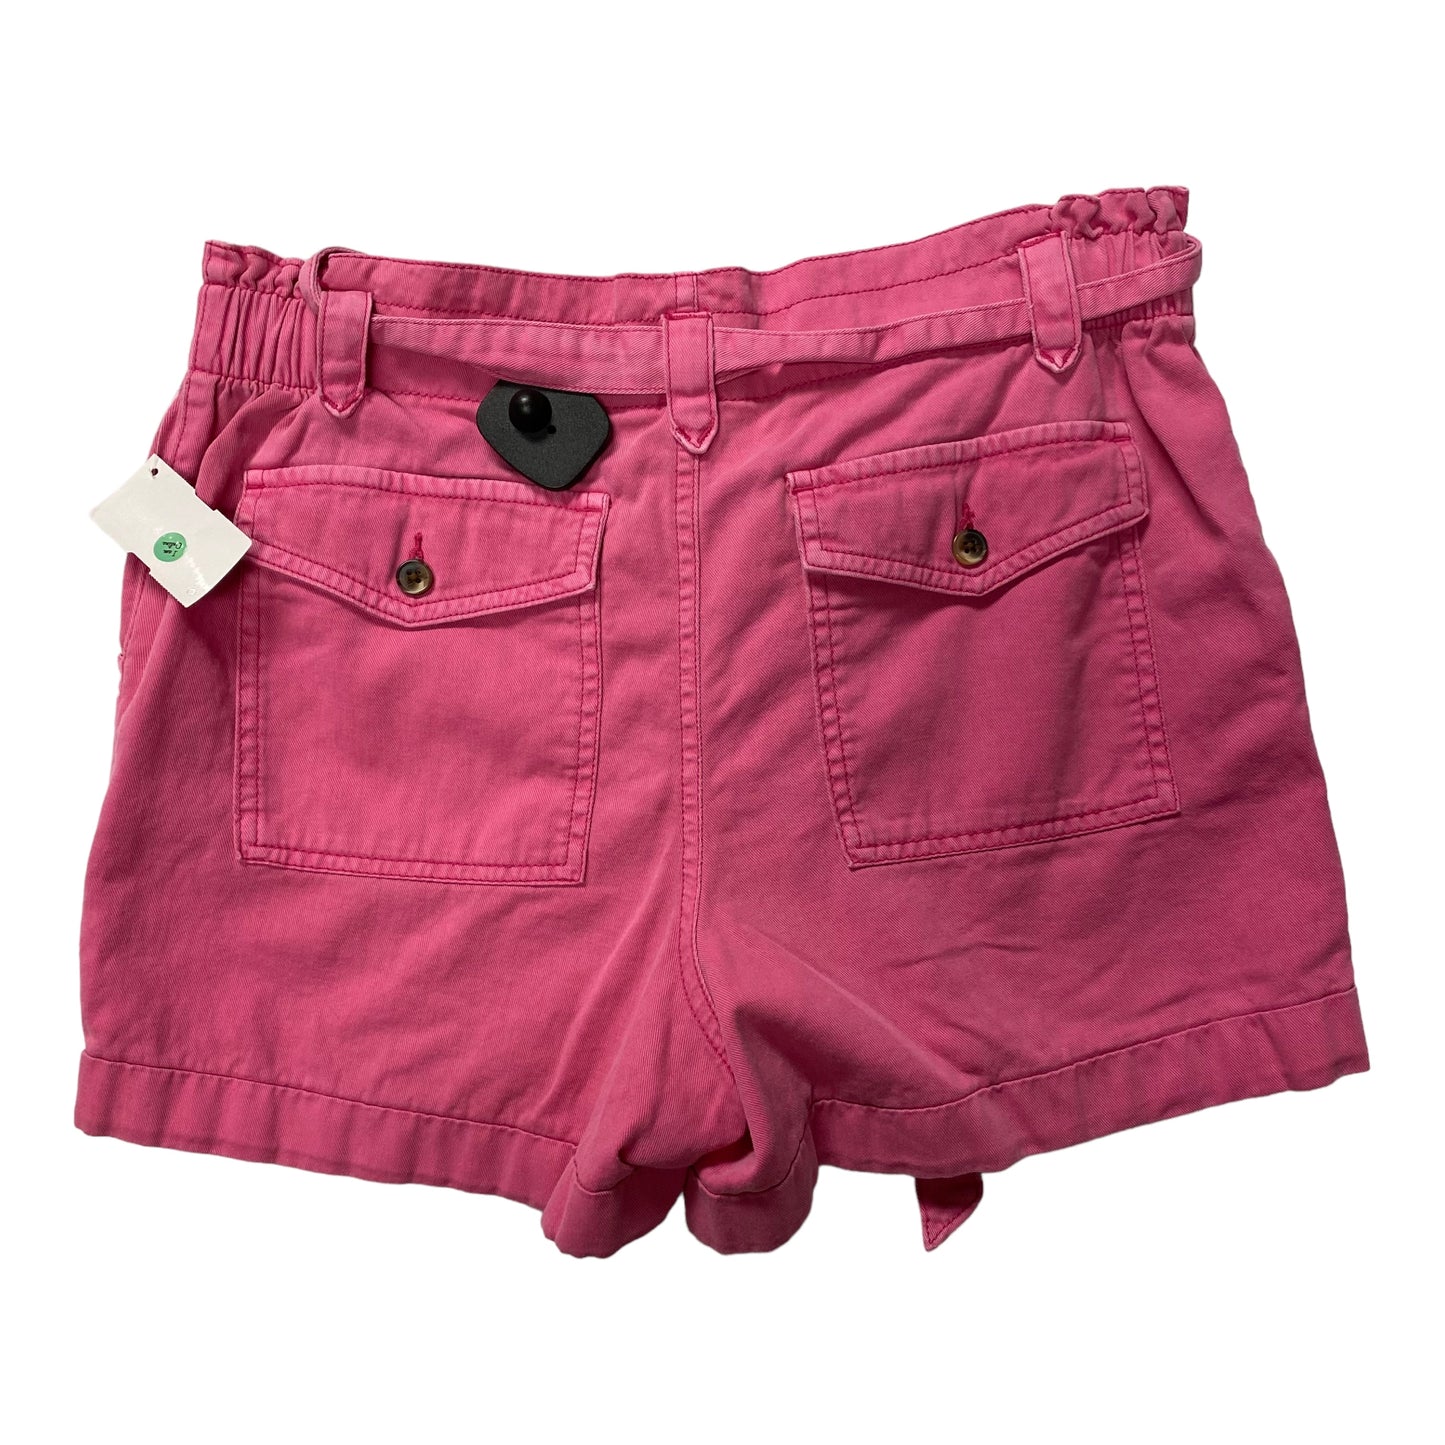 Pink Shorts Old Navy, Size S